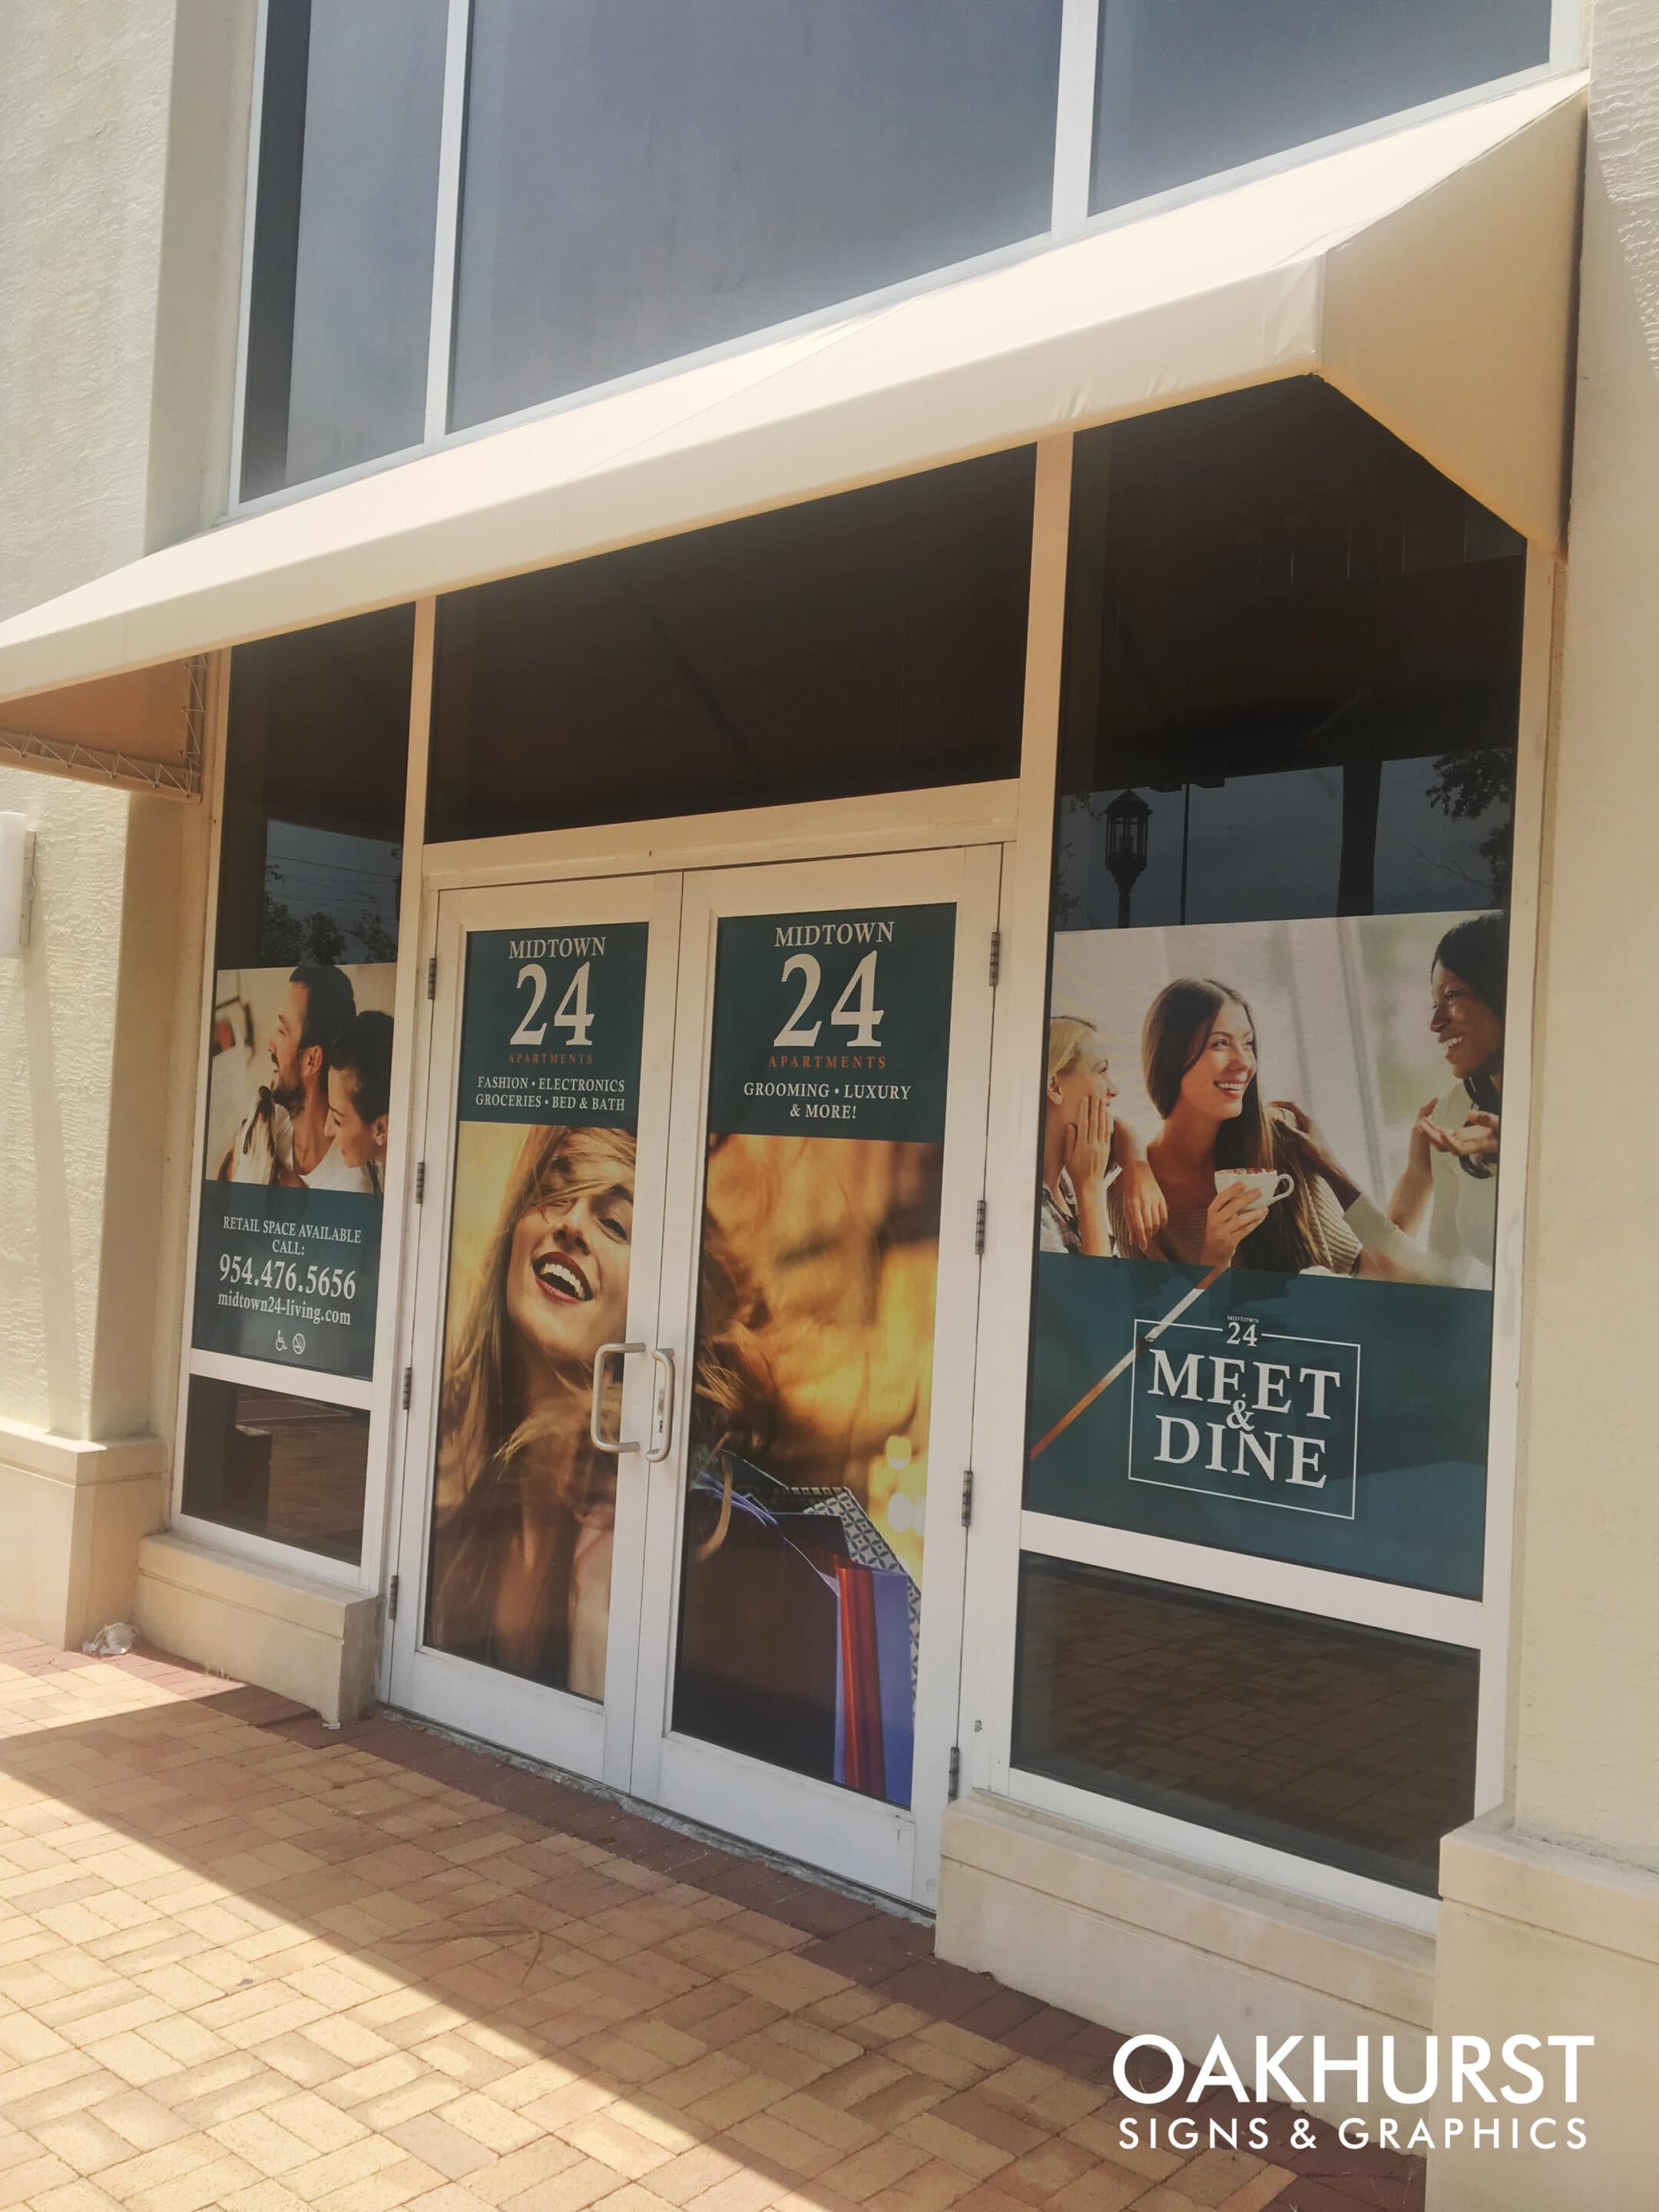 Window and door printed graphics for Midtown 24 Apartments